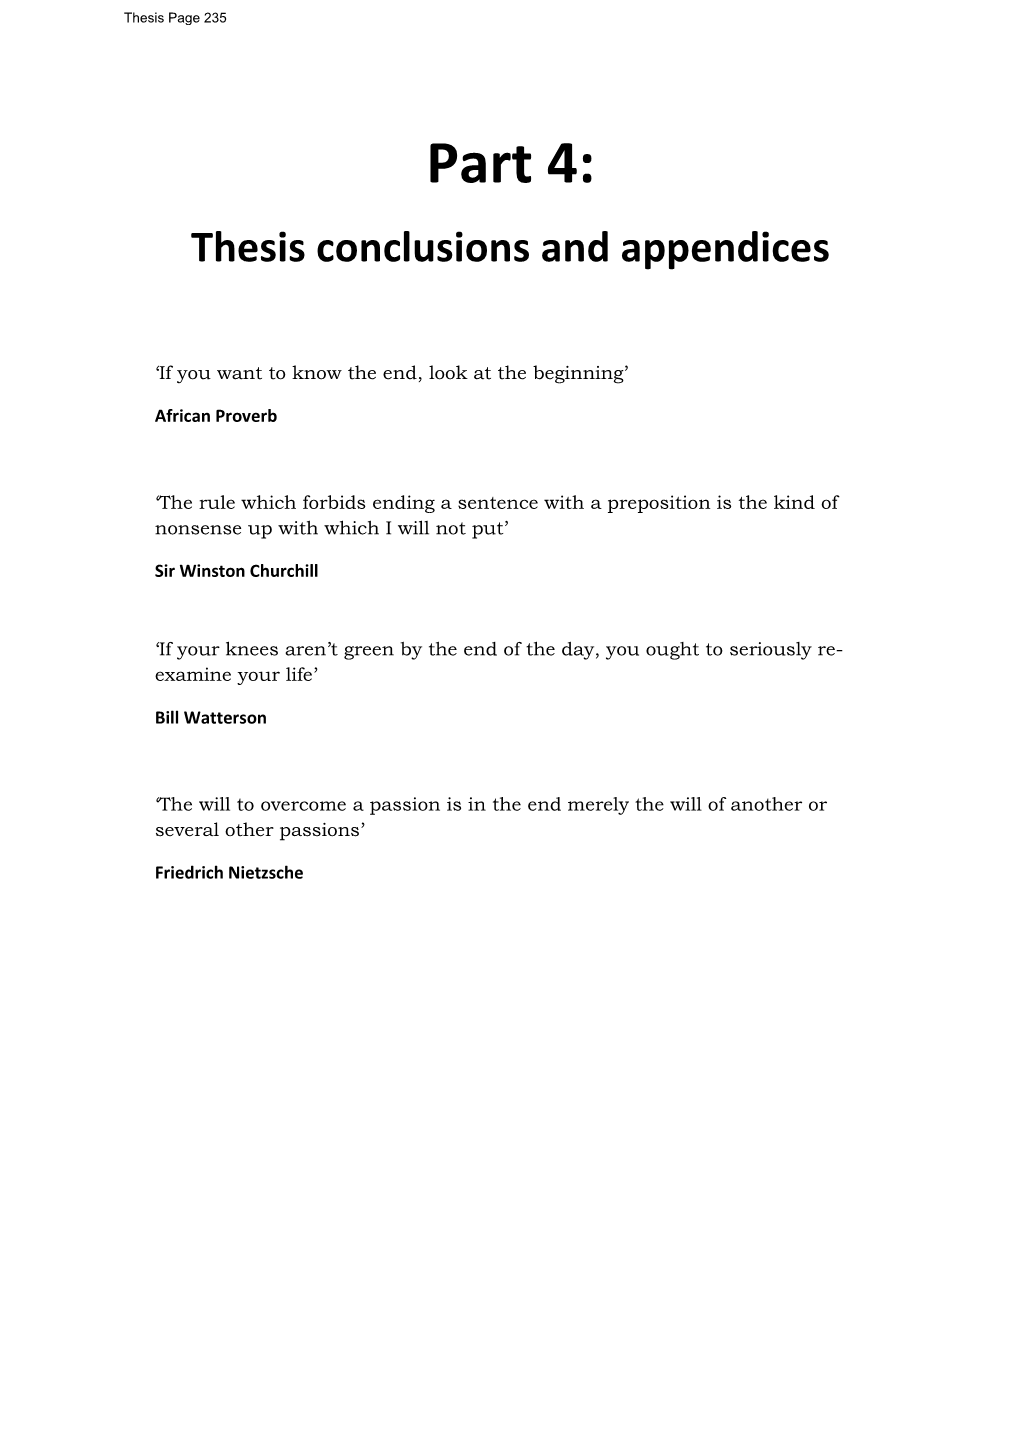 Part 4: Thesis Conclusions and Appendices